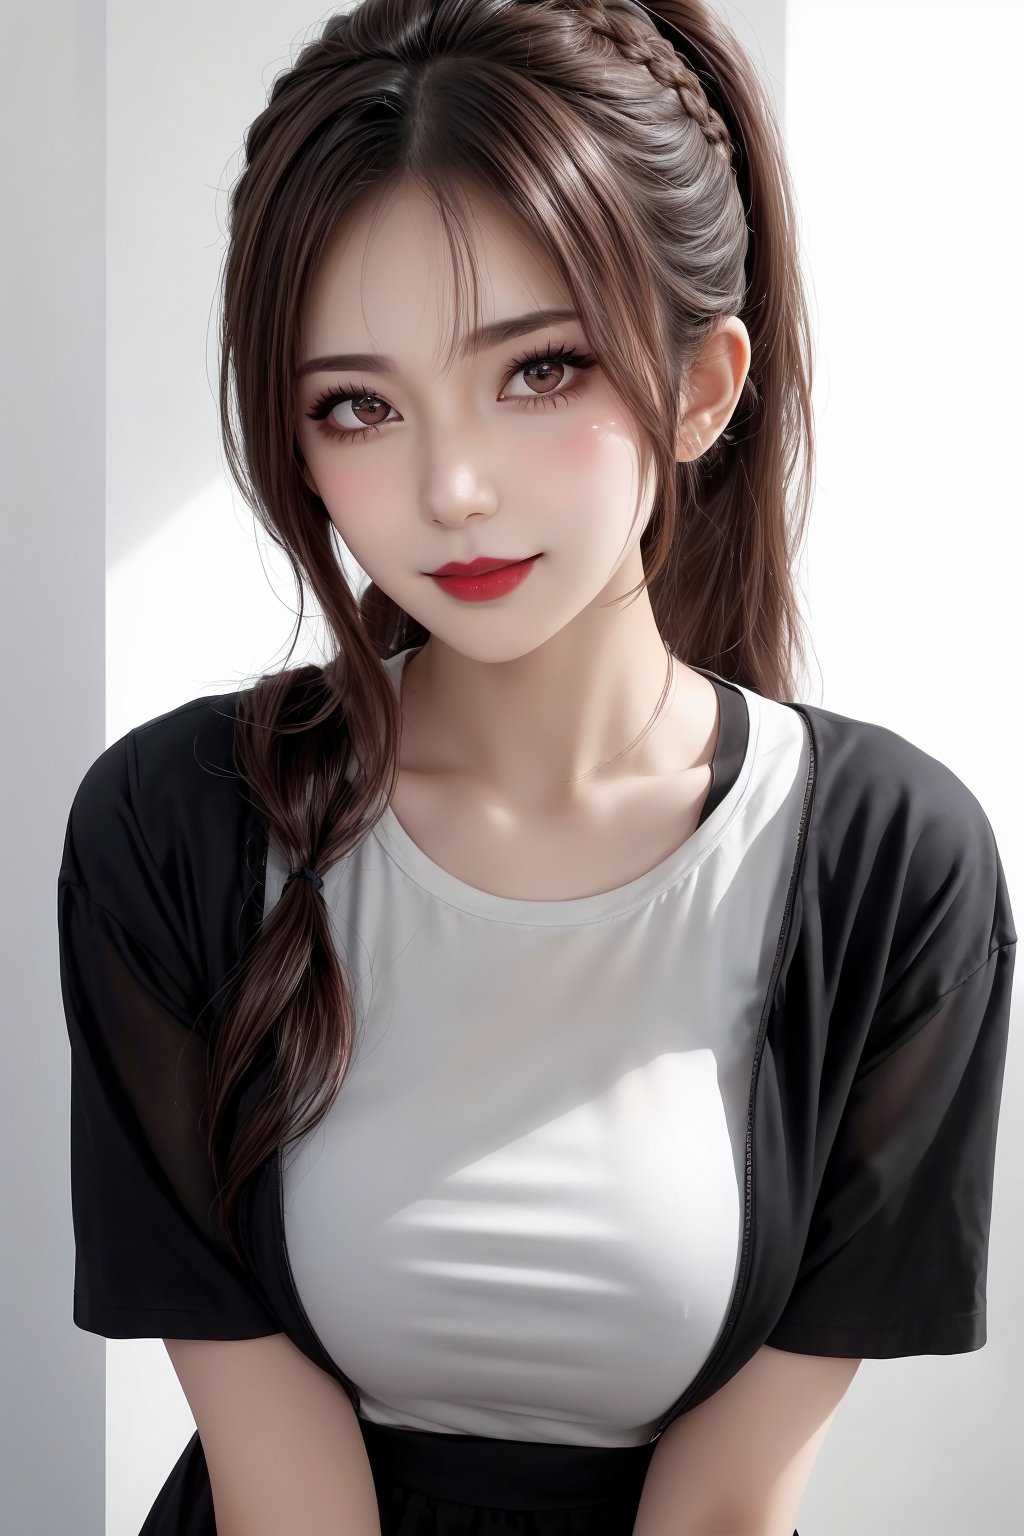 On a simple white background, a 20-year-old woman exudes casual charm. Her braided ponytail, with intricately woven strands, adds sophistication to her laid-back style. She wears a comfortable T-shirt, its design reflecting a relaxed vibe, and her dark red lipstick complements the subtle details of her hairstyle. Her fair skin glows with an ultra-fine texture, and her eyes are big and beautiful, with delicate eyelids. A warm, confident smile plays on her slightly upturned lips. She poses with a relaxed posture, inviting the viewer to approach. The lighting highlights the texture of her outfit, emphasizing the fabric's subtle details. Her extremely delicate face and hair create an atmosphere of ease and approachability.